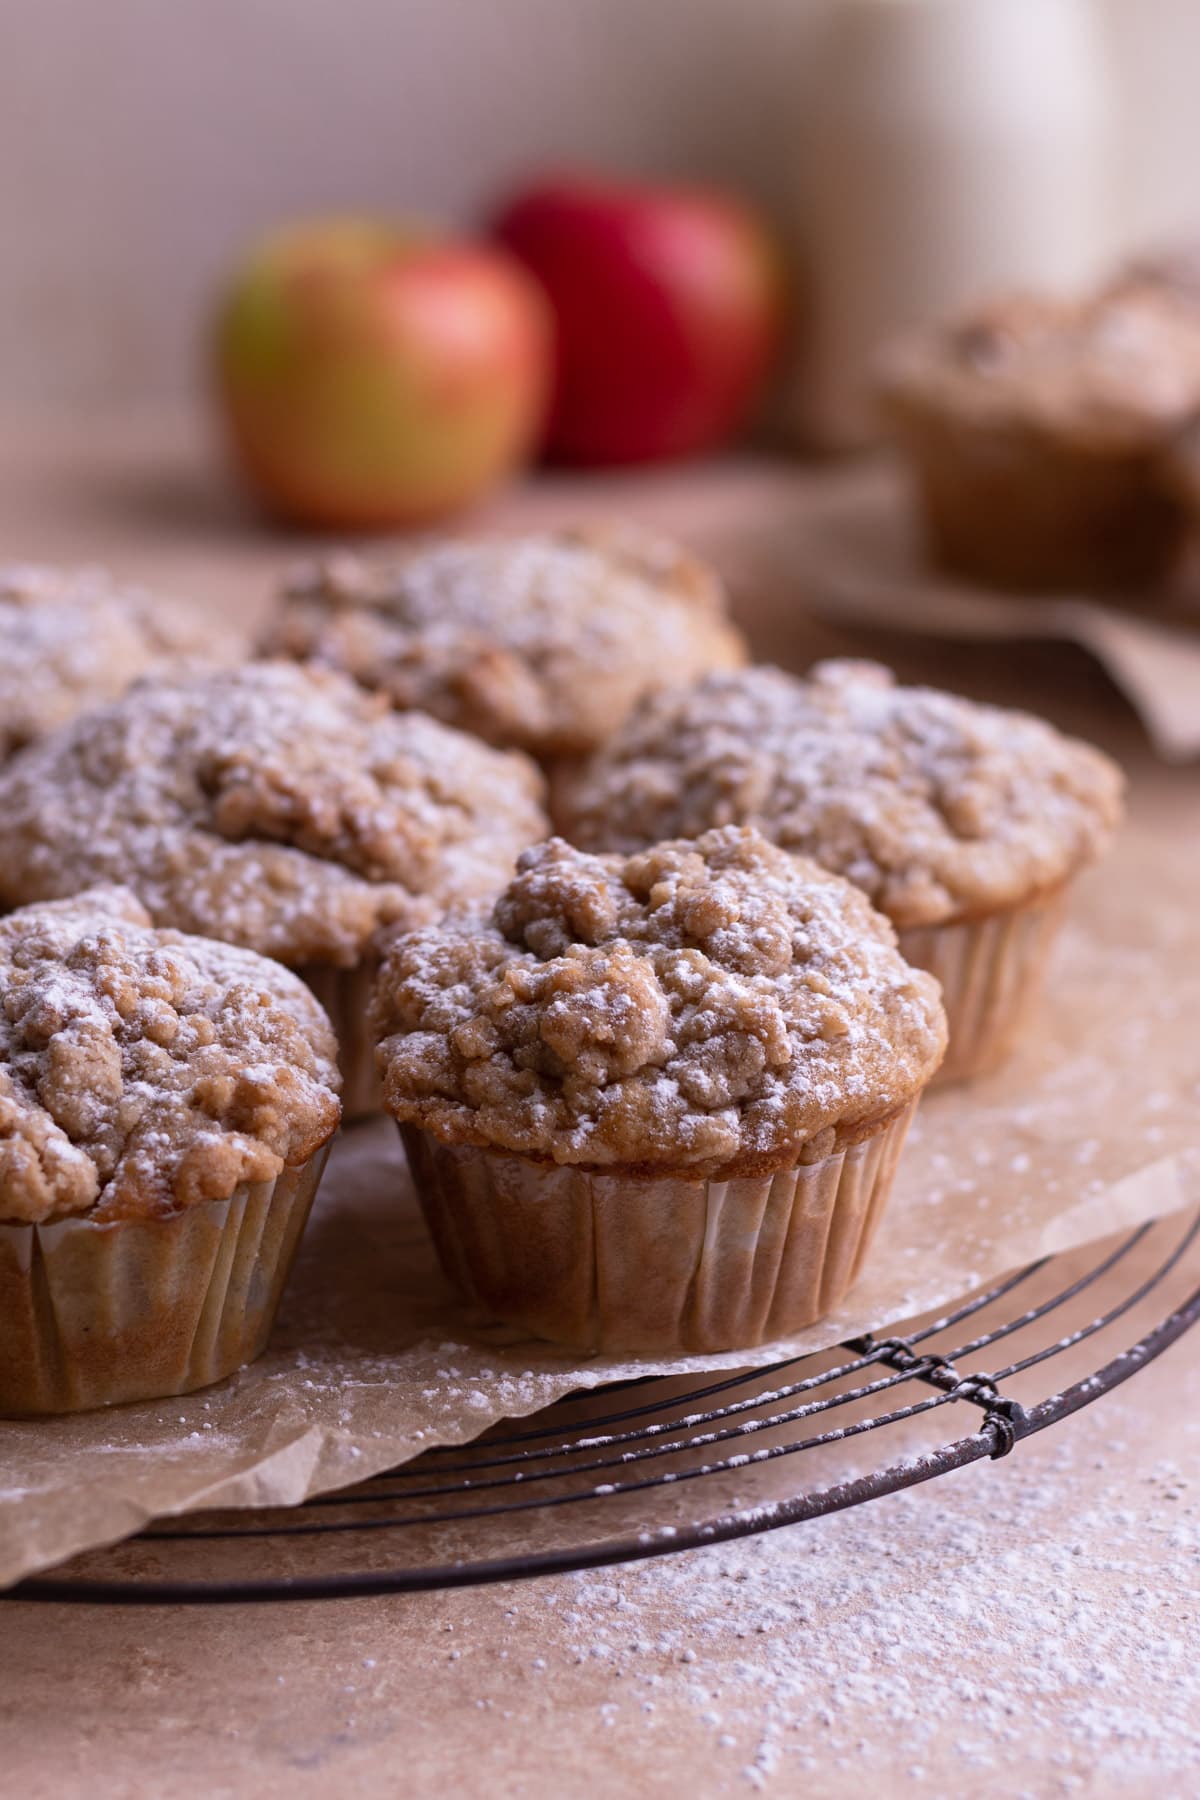 Spiced Apple Sour Cream Muffins with Crumb Topping on a cooling rack with more muffins, milk and apples in the background.